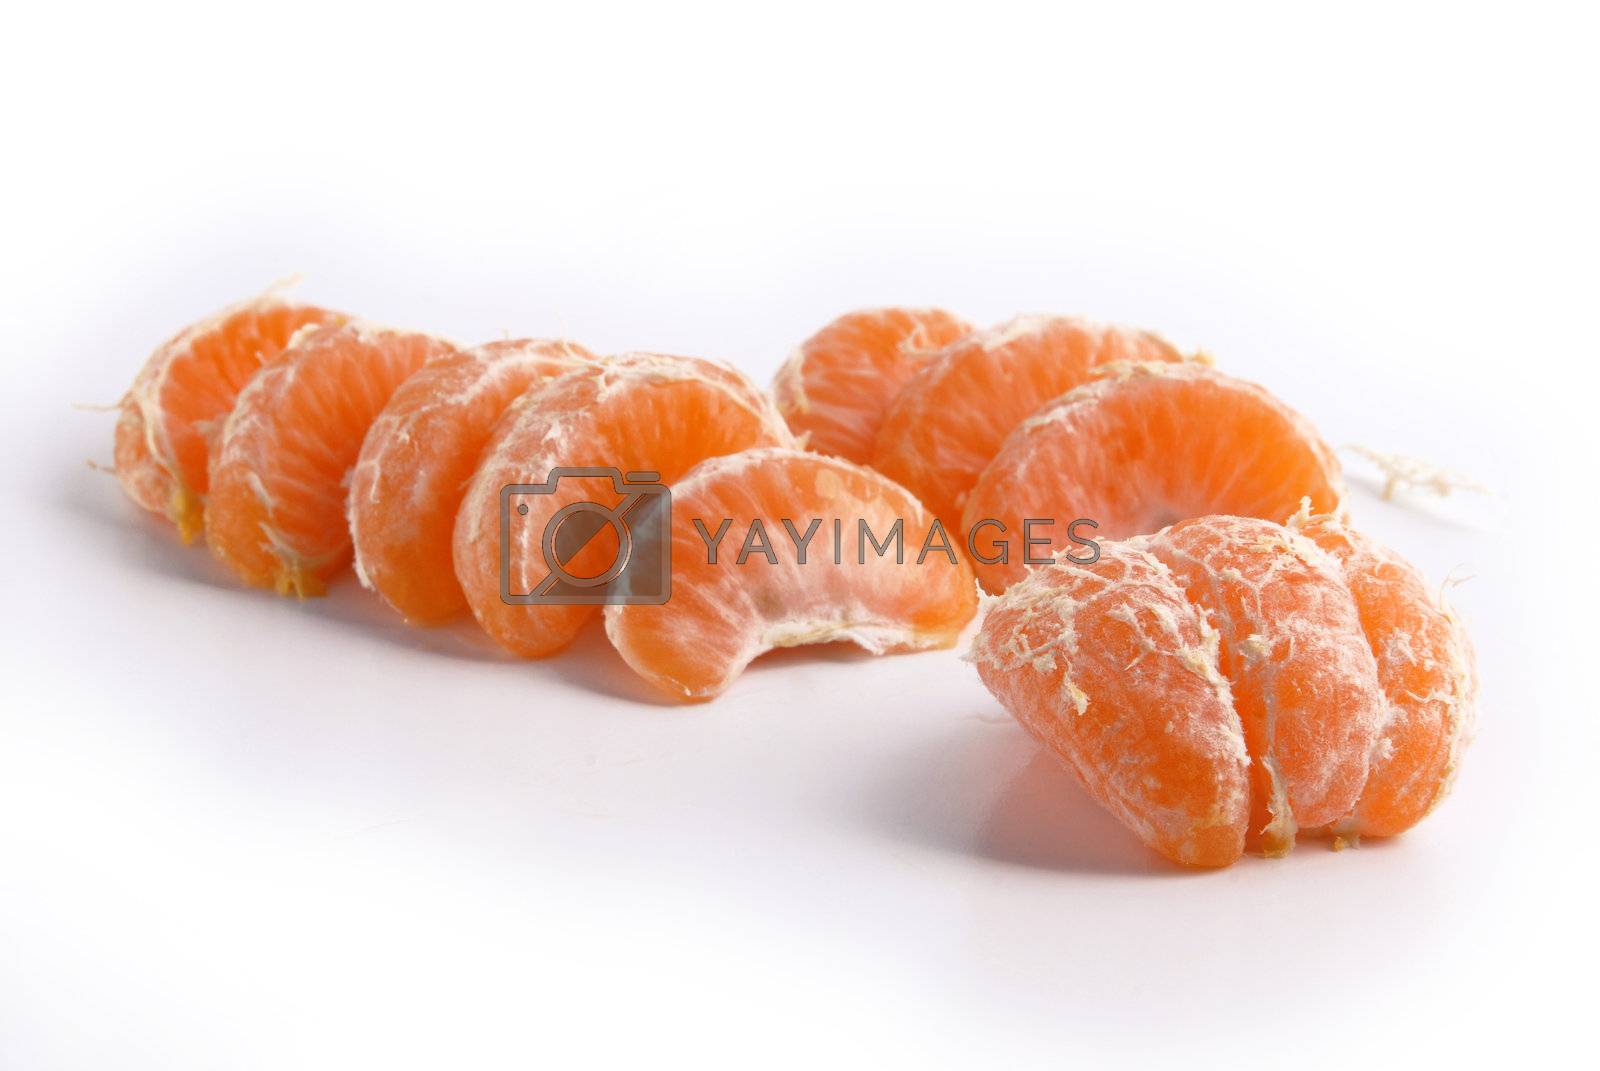 Royalty free image of Tangerine slices  by cienpies